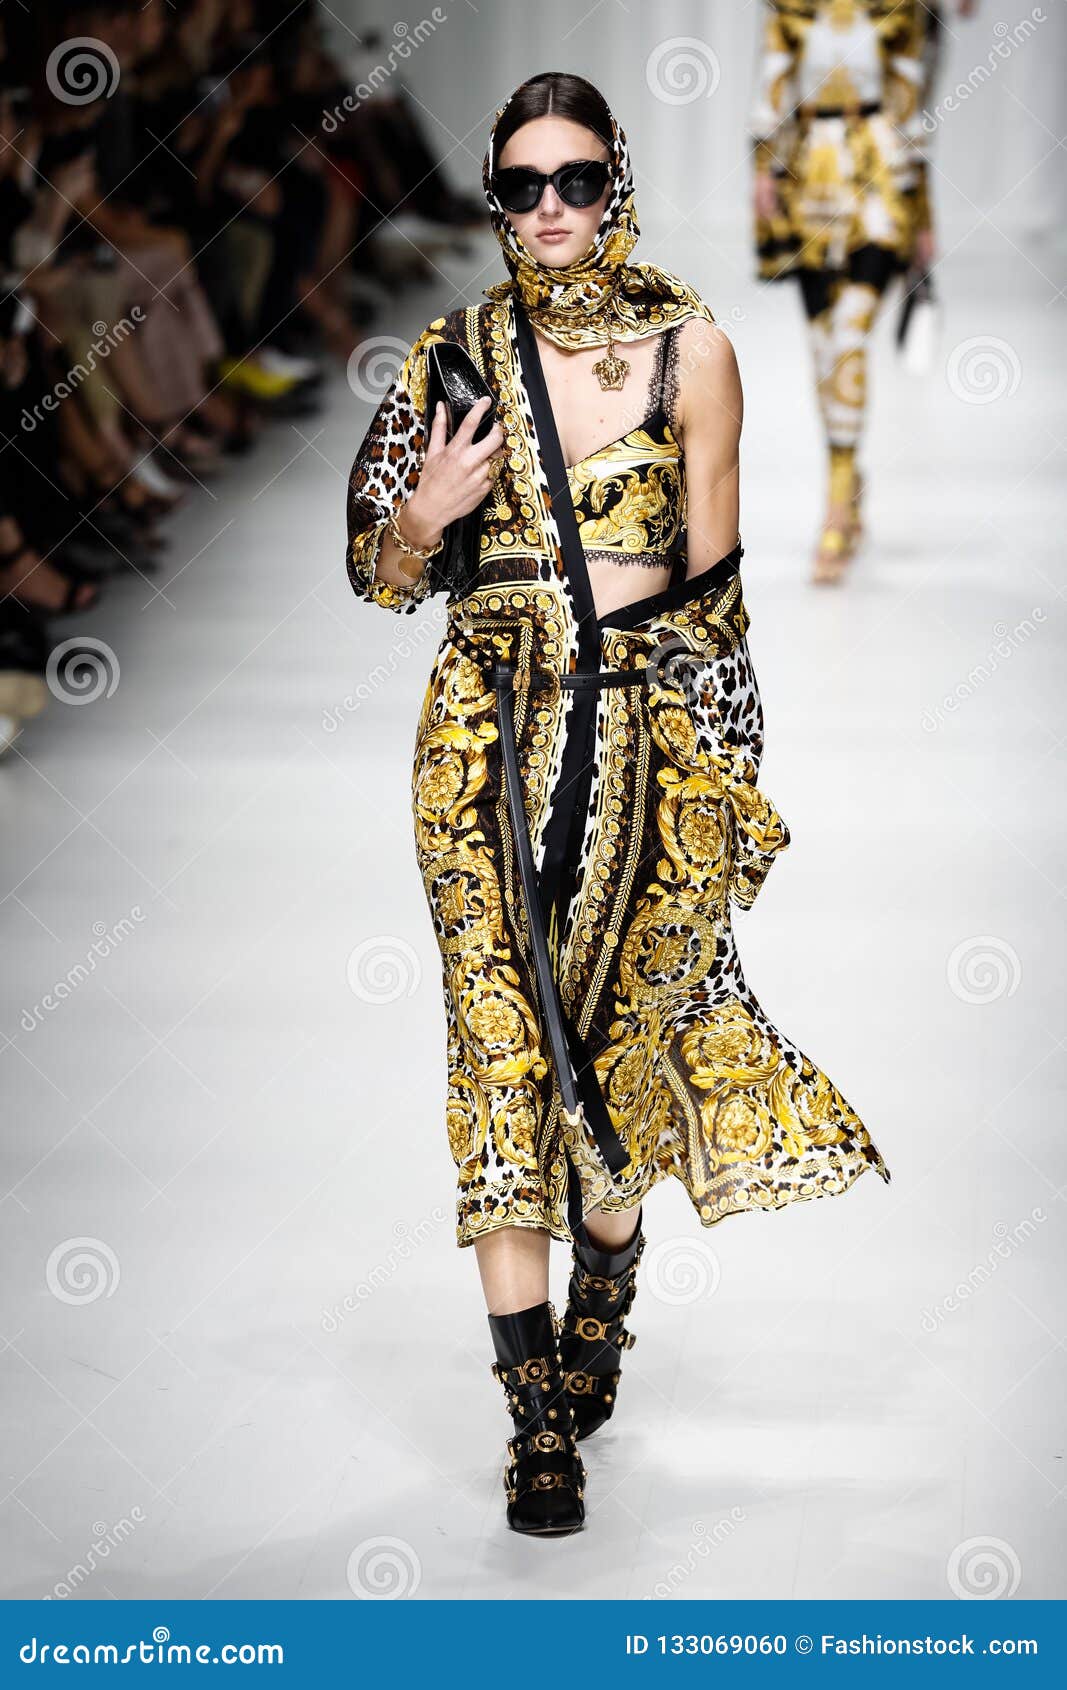 Justine Asset Walks the Runway at the Versace Show during Milan Fashion ...